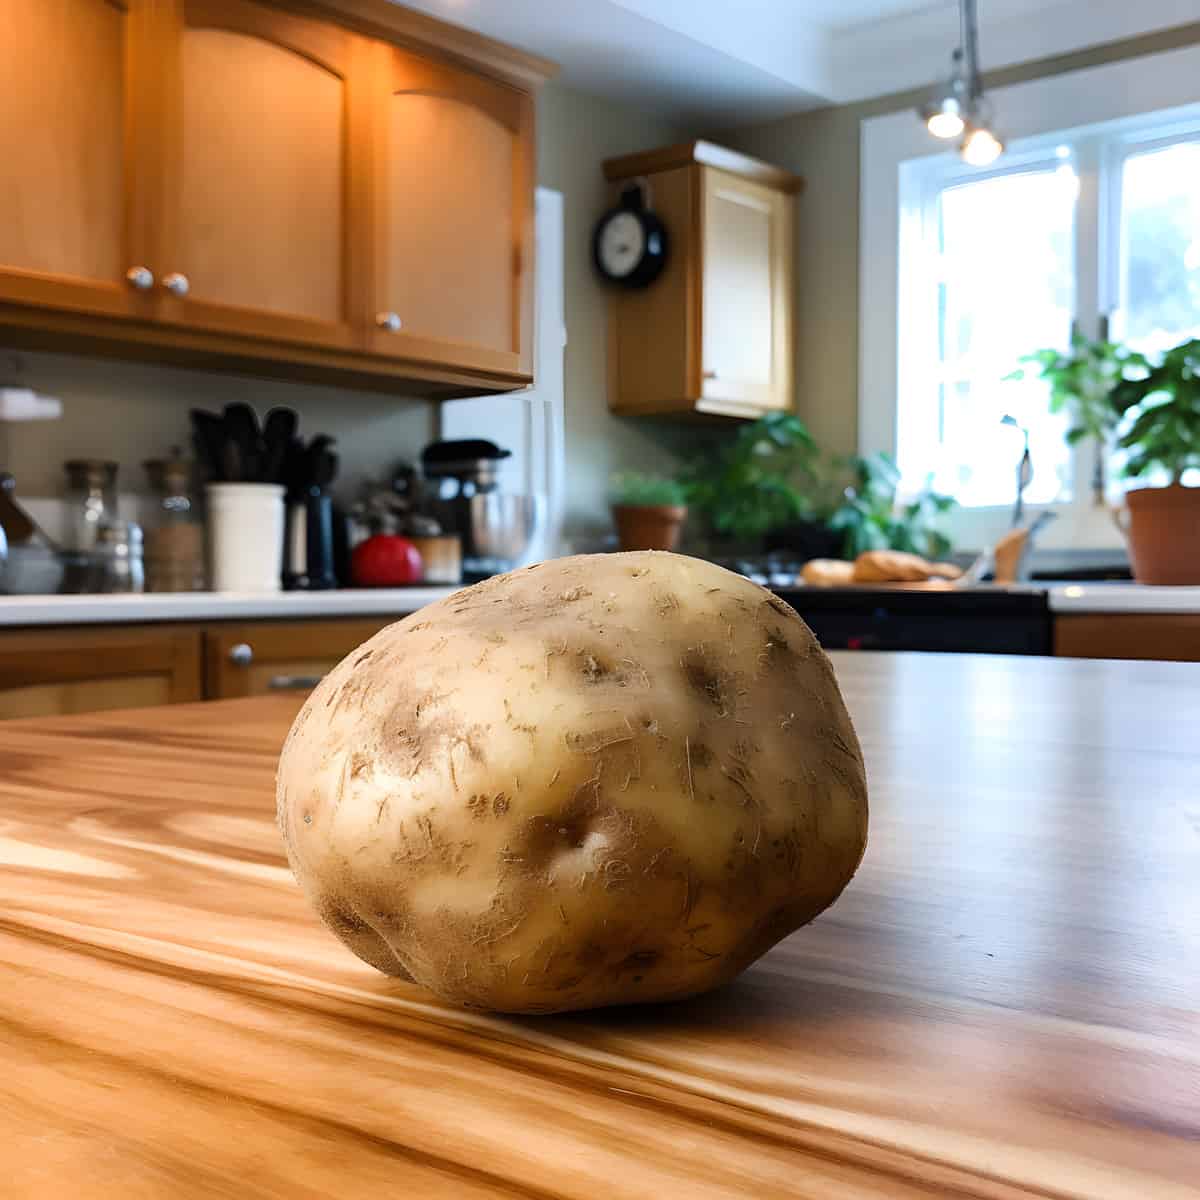 Ratte Potatoes on a kitchen counter